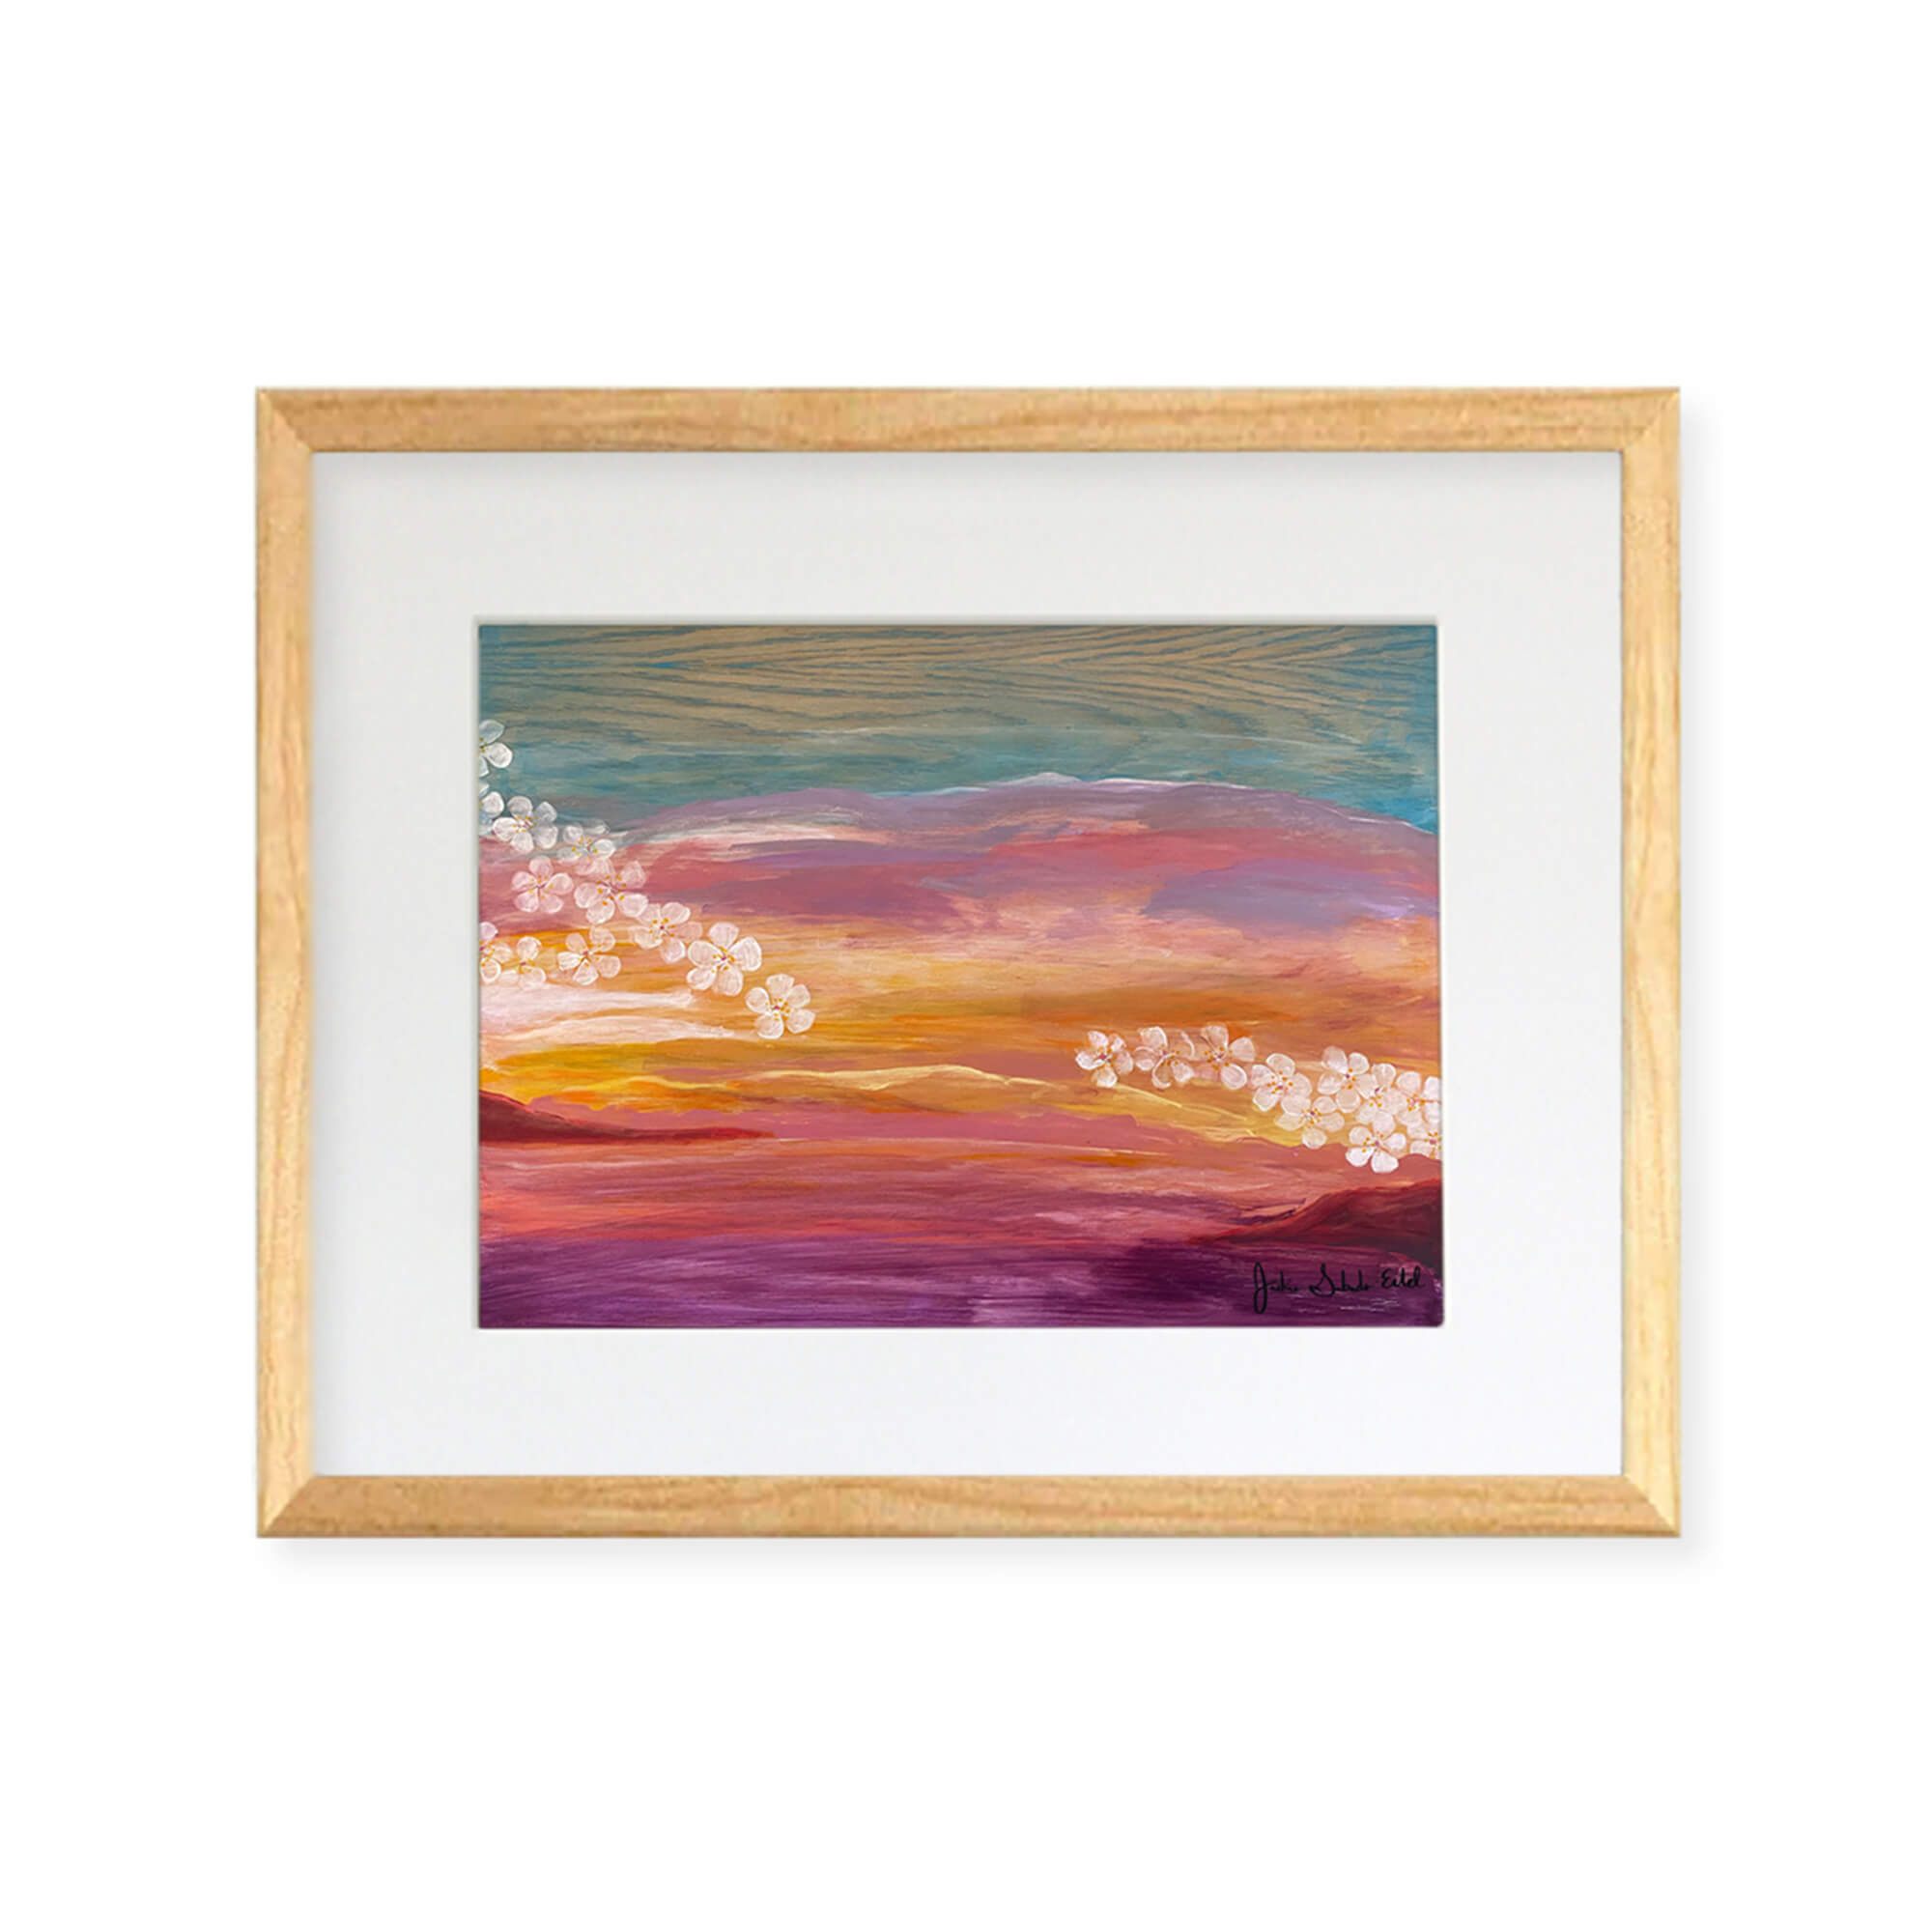 A framed matted art print featuring a vibrant colorful sunset and plumeria flowers by Hawaii artist Jackie Eitel